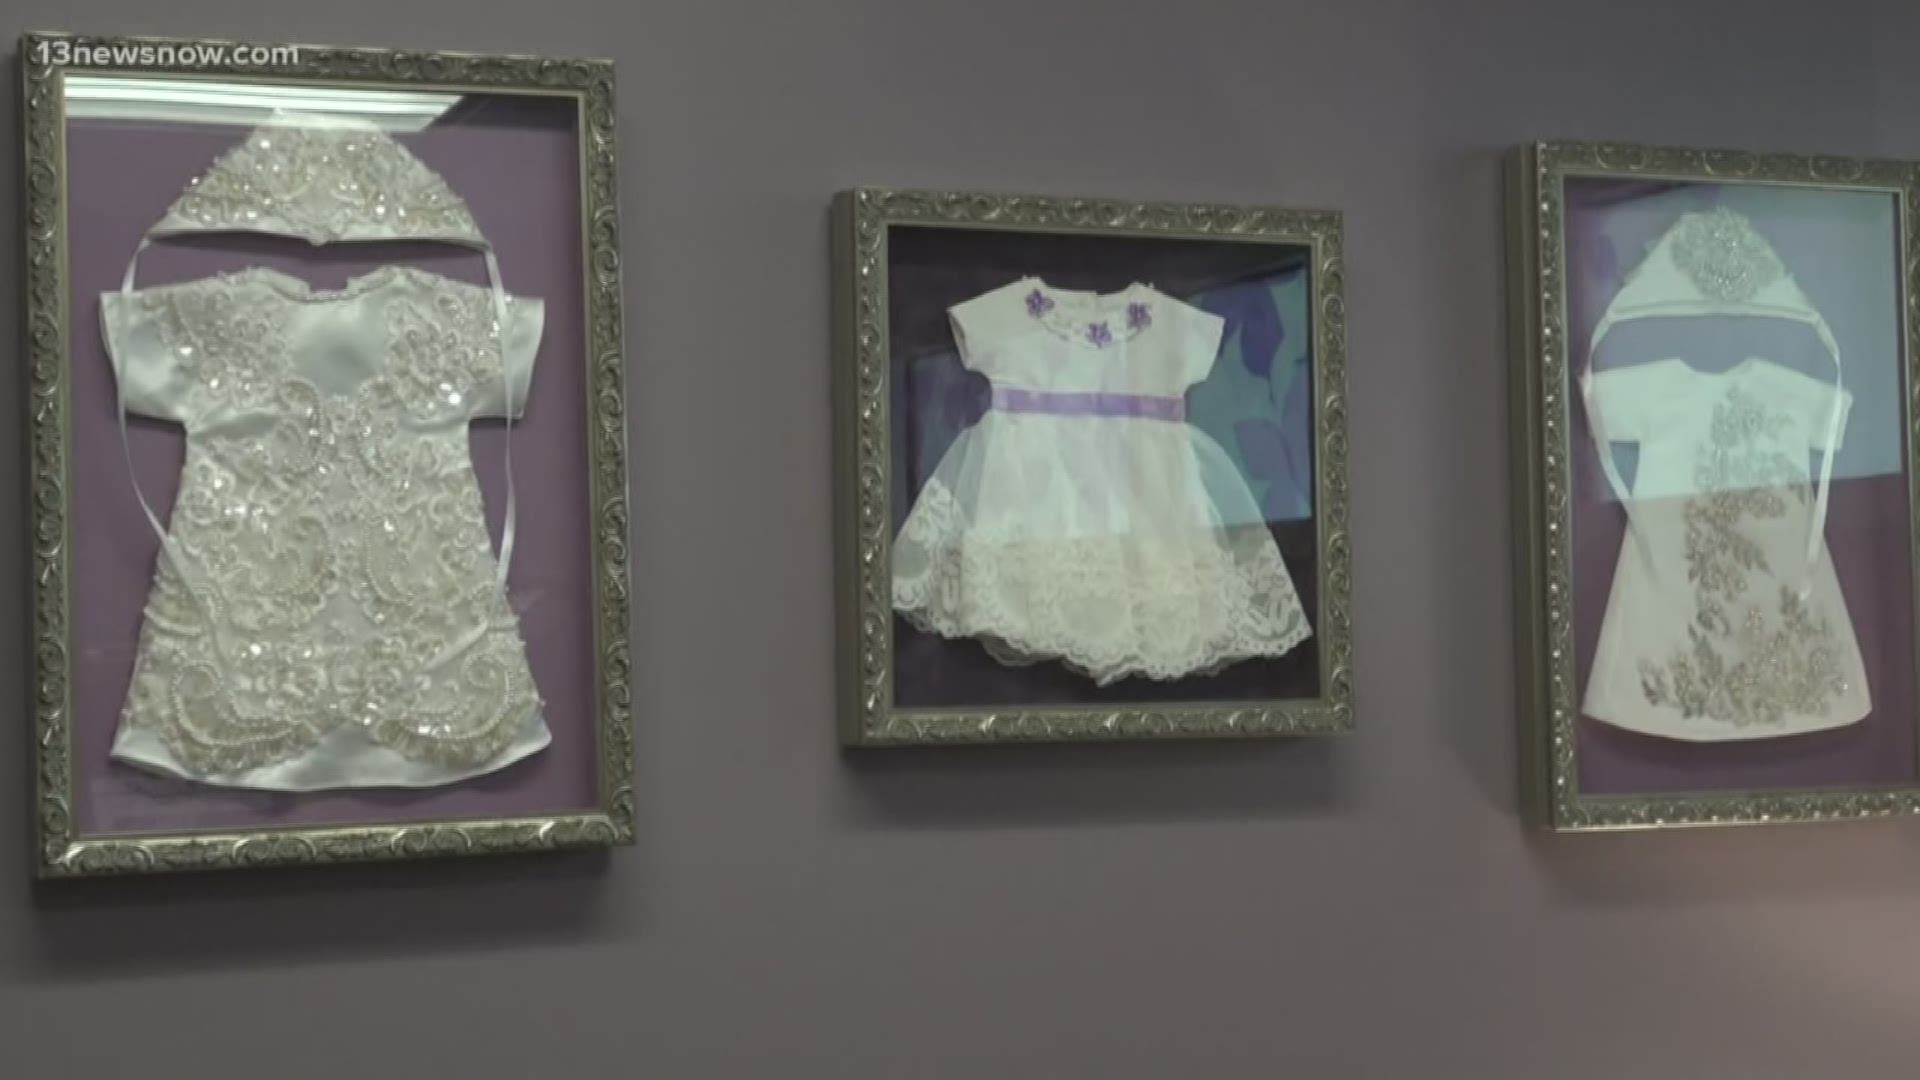 "Butterfly Room" is for families of babies who are stillborn or die just after birth. Ten years ago, Heather and Demitri Wilson lost their newborn daughter Kennedy. They were able to channel their grief into Kennedy’s Angel Gowns, a charity that makes burial gowns and onesies from donated wedding dresses to share with families across the country.